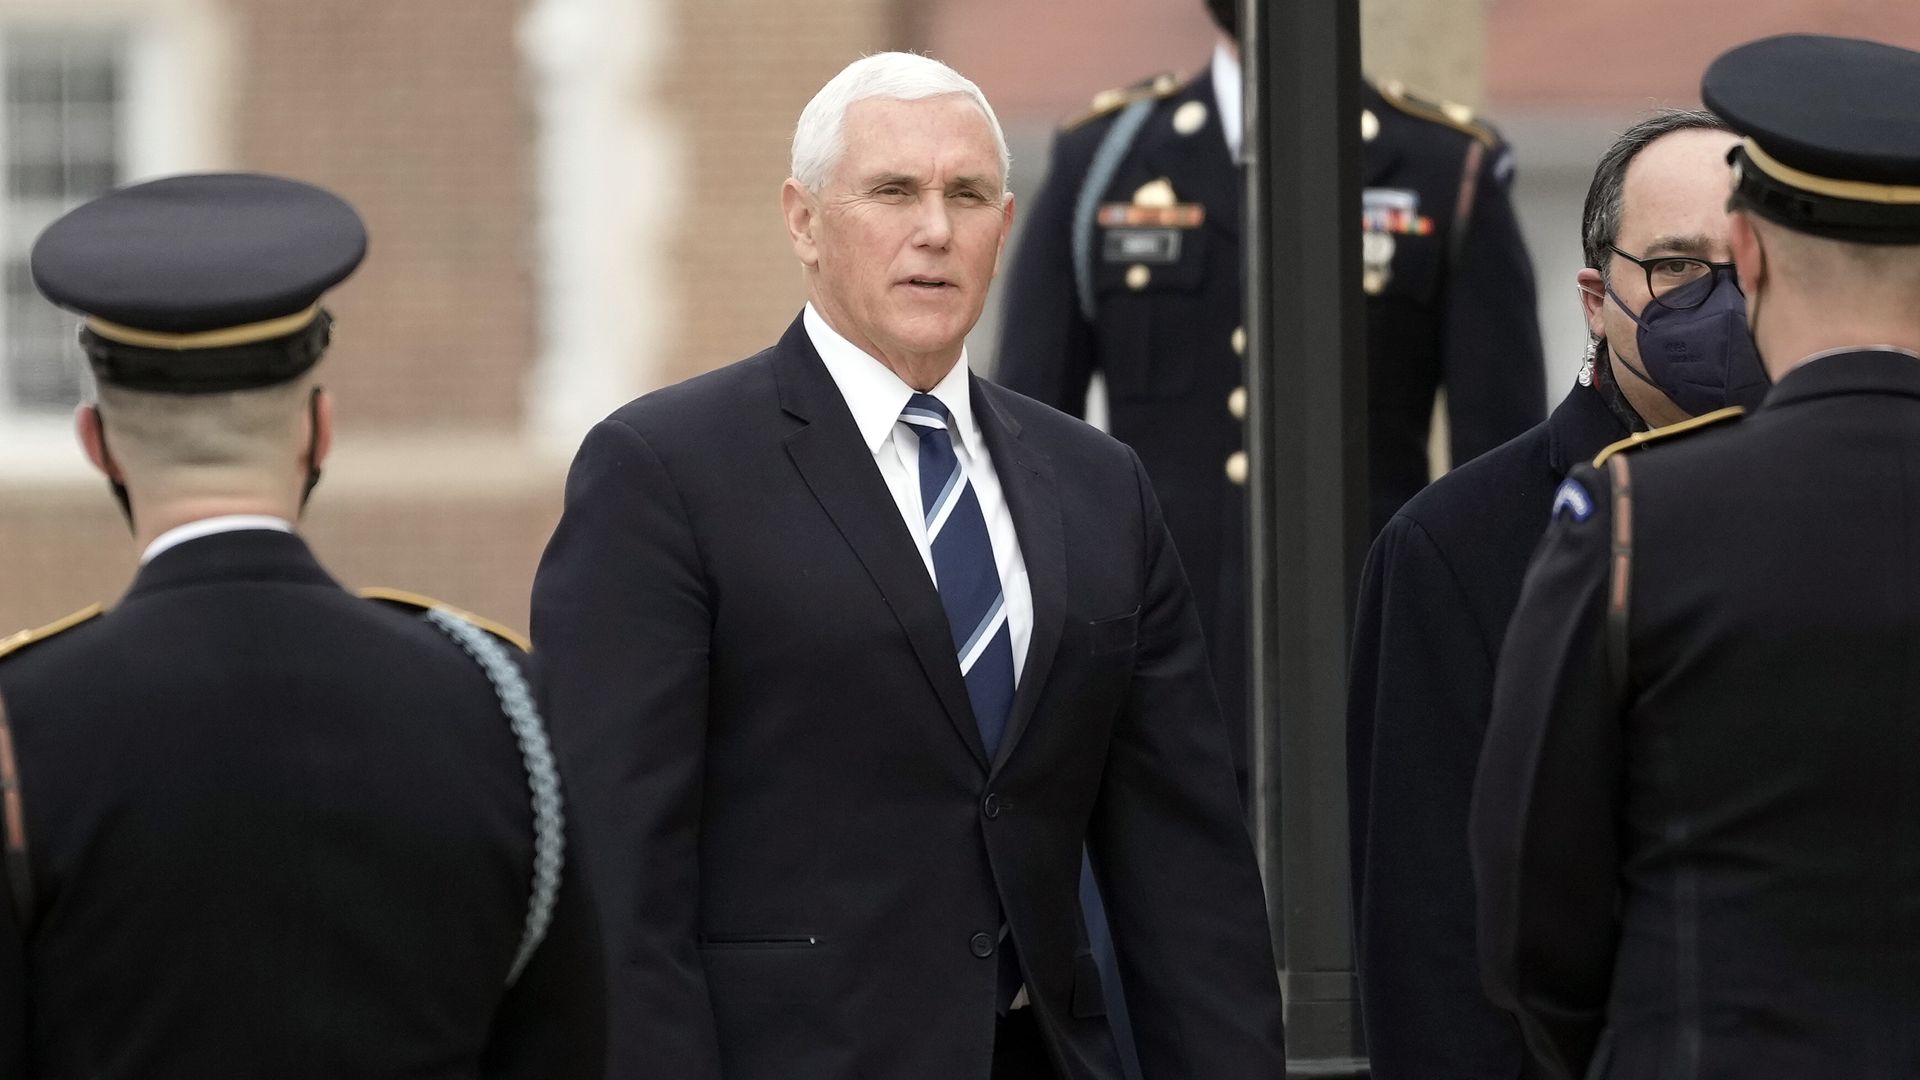  Former U.S. Vice President Mike Pence arrives for the funeral service of the late former Senator Robert Dole (R-KS) at Washington National Cathedral on December 10, 2021 in Washington, DC.